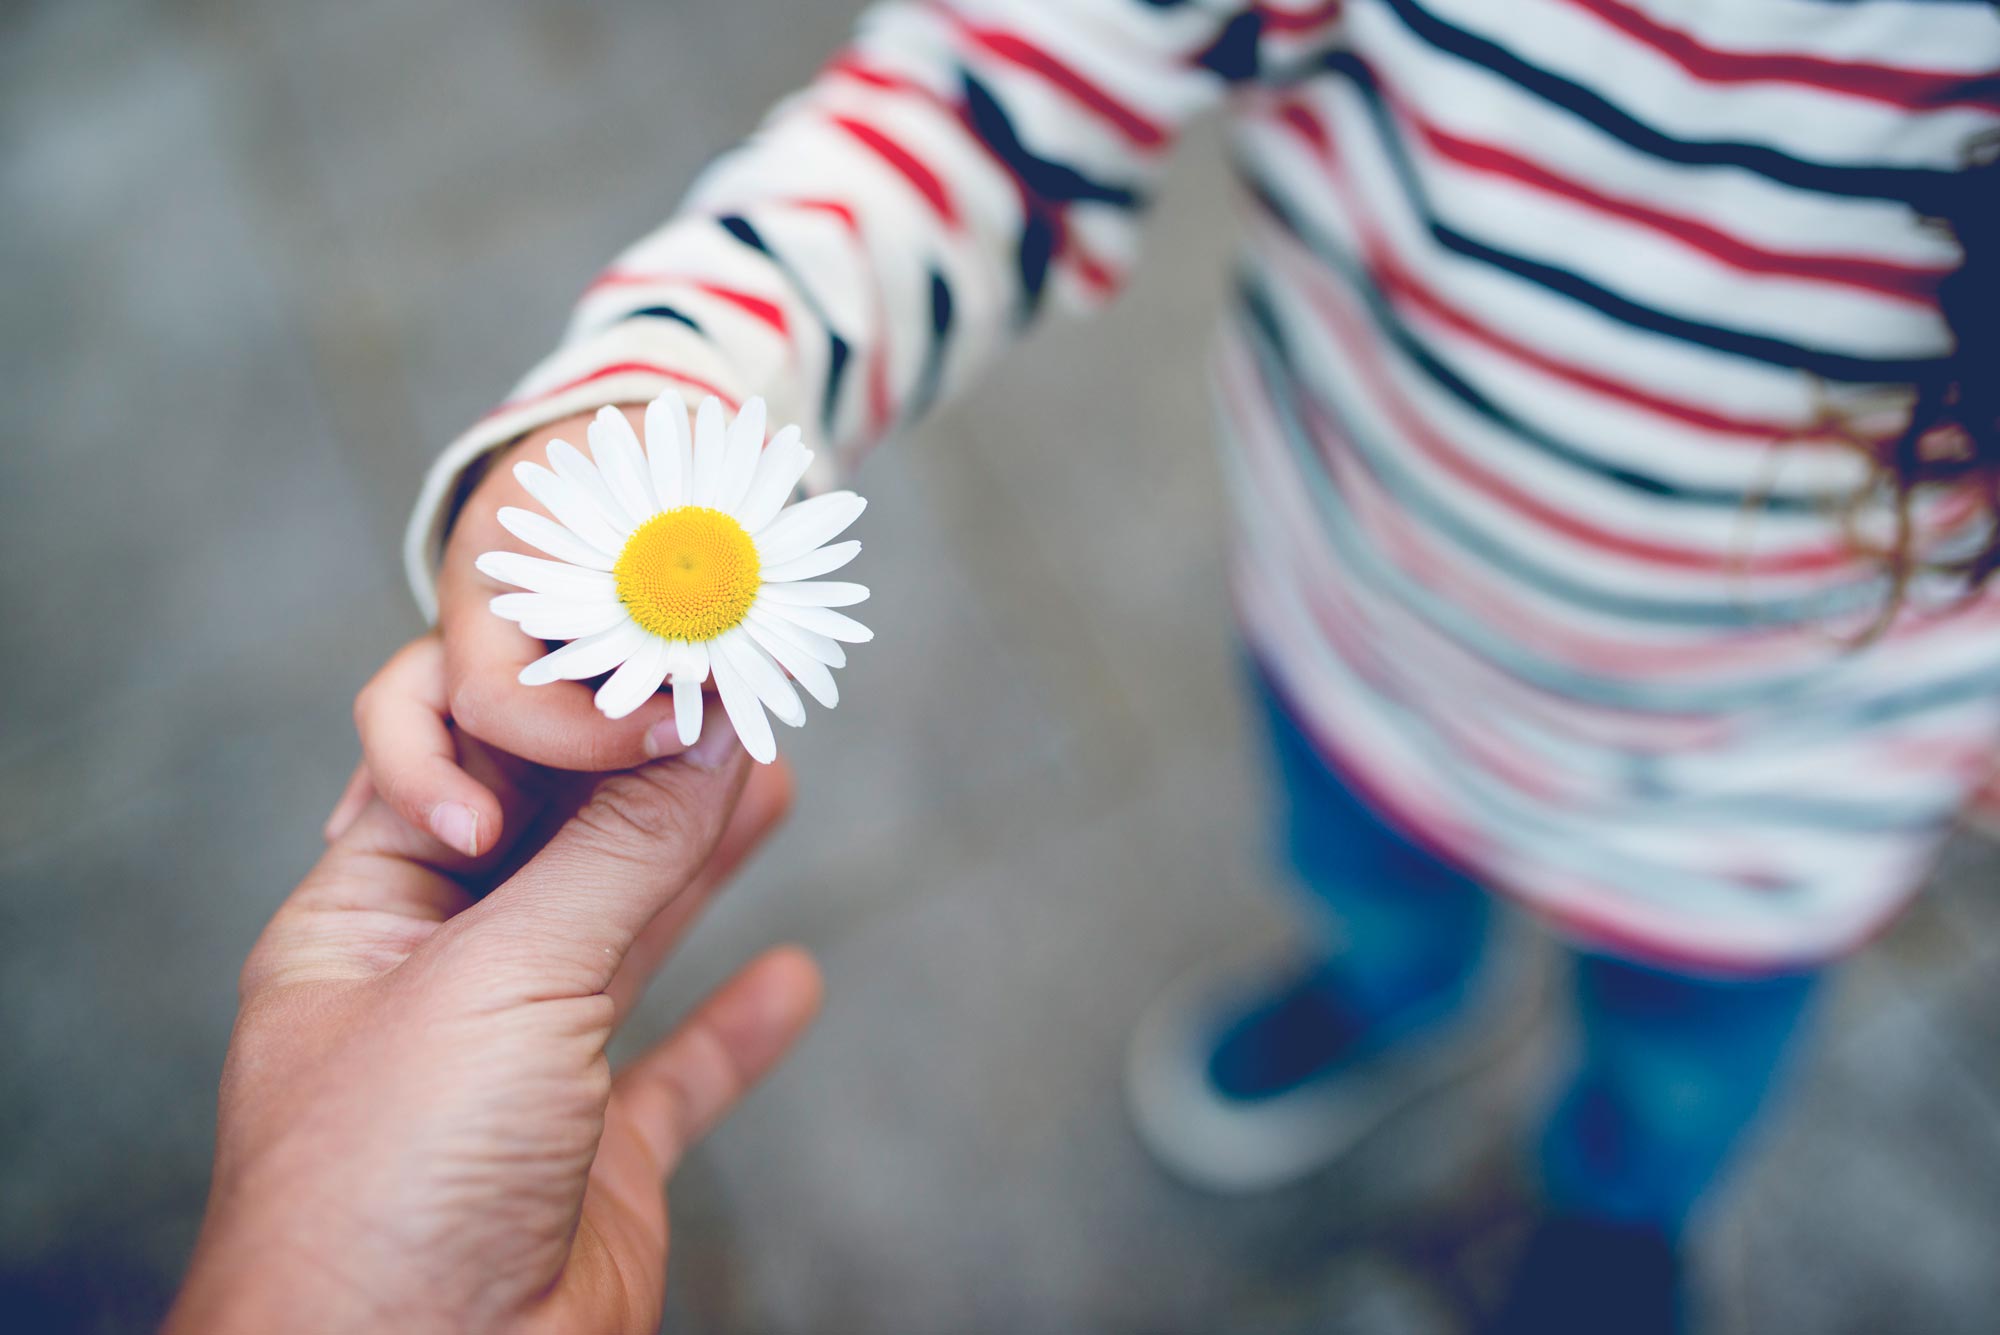 Small child handing daisy to an adult